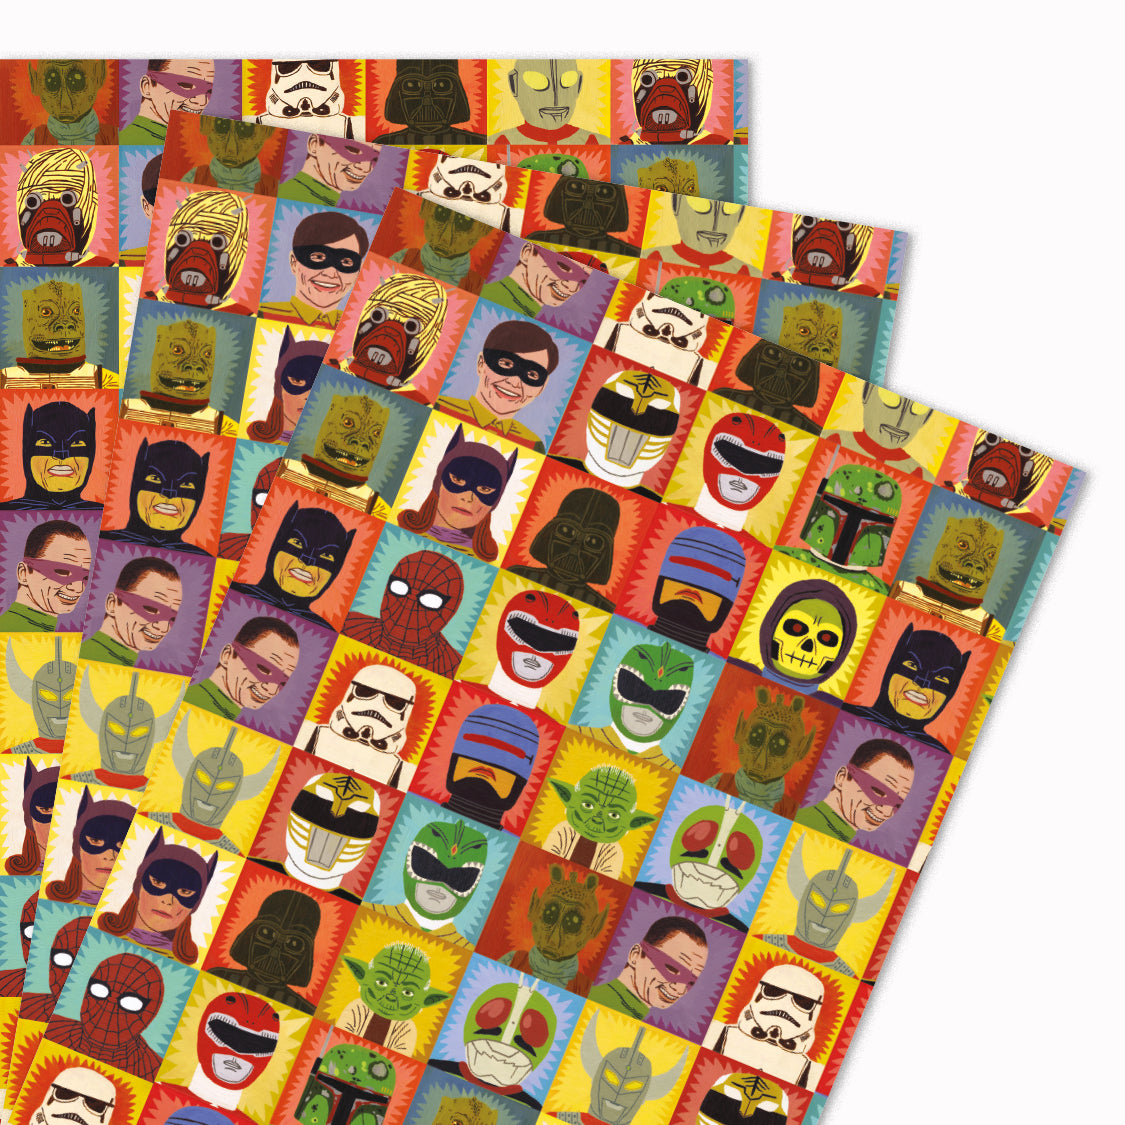 Pack of 3 'Heroes and Villains' gift wrap sheets illustrated by Jack Teagle for USTUDIO Design. This design features an illustrative interpretation of some of the best loved and most iconic heroes and villains. A cult classic design loved by kids both big and small.